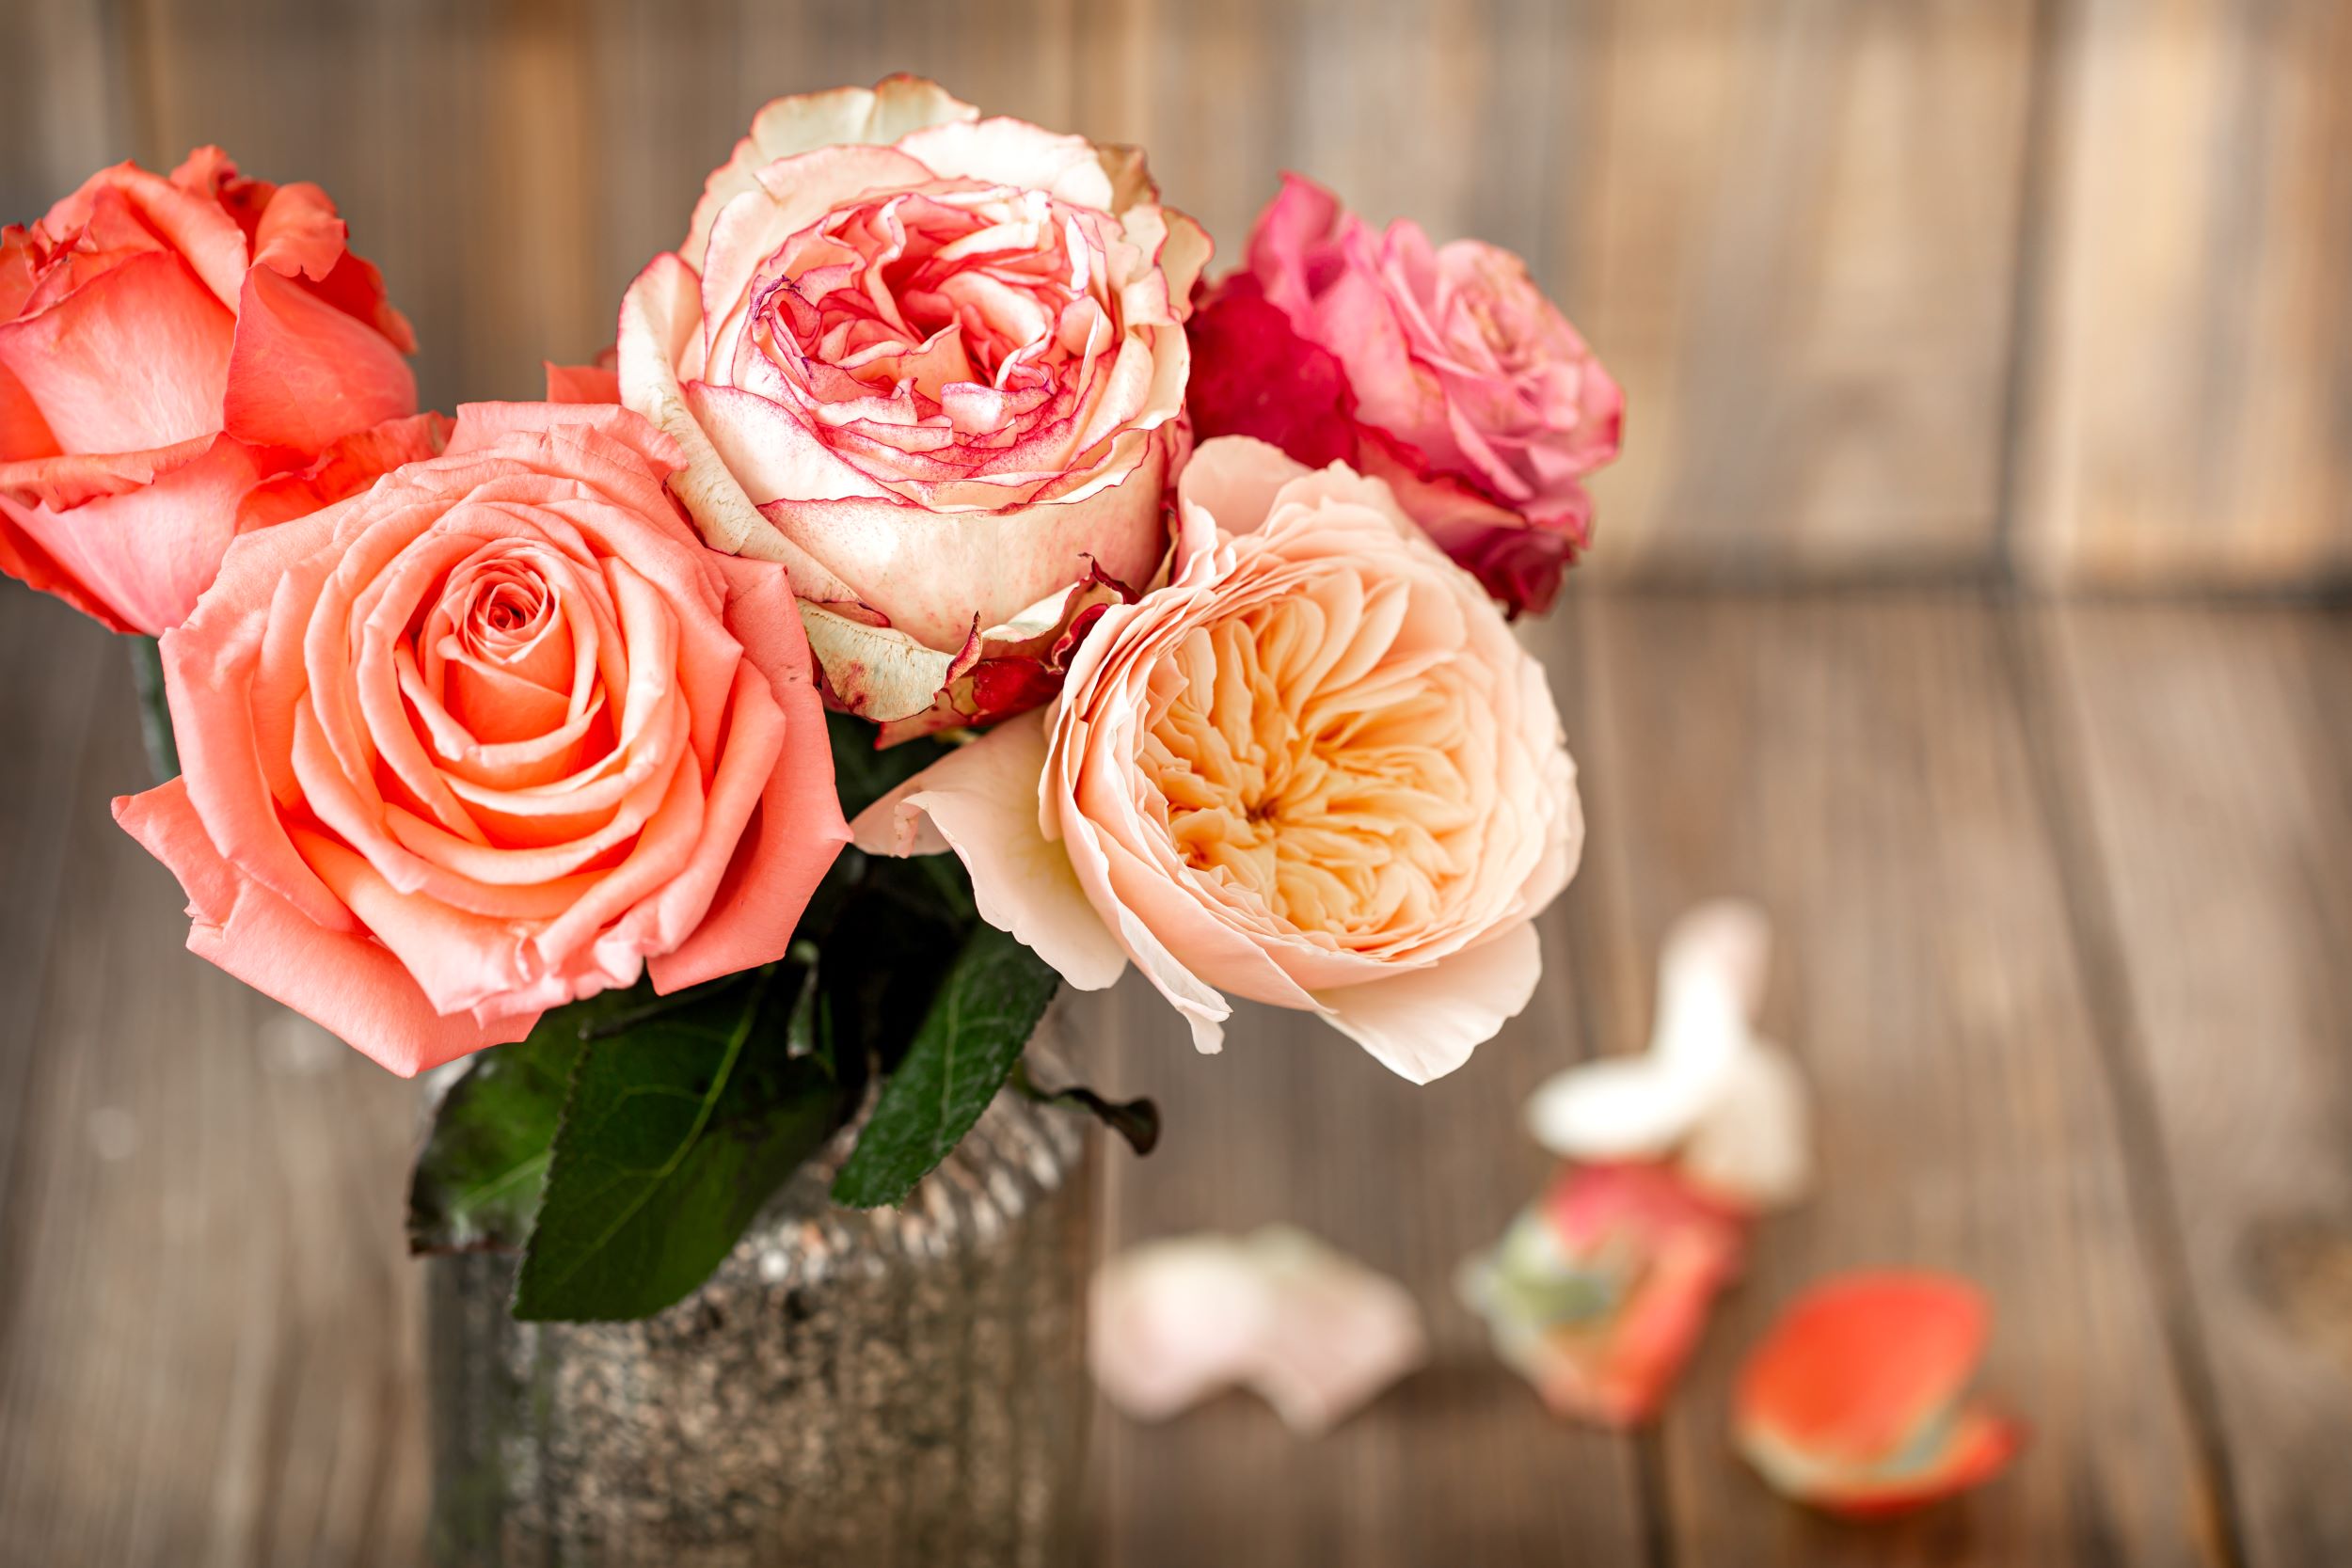 An image of a vase filled with different shades of pink roses.